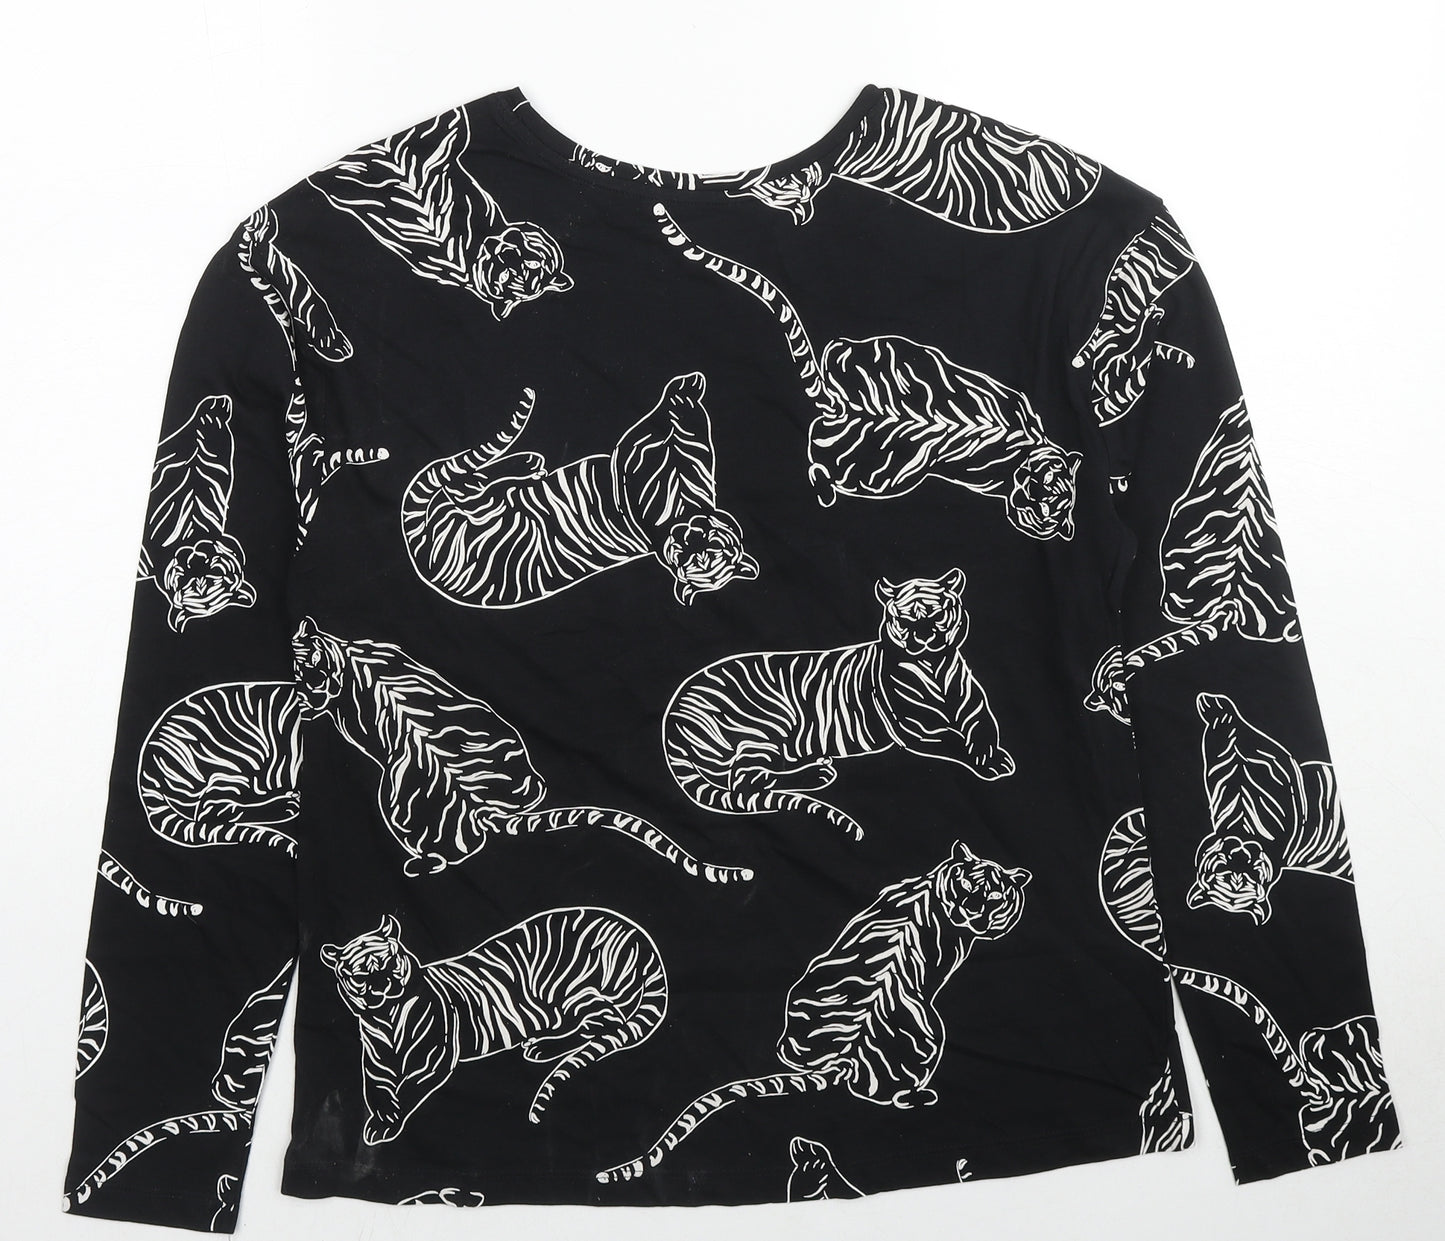 Marks and Spencer Womens Black Geometric Cotton Basic T-Shirt Size S Crew Neck - Tiger Print